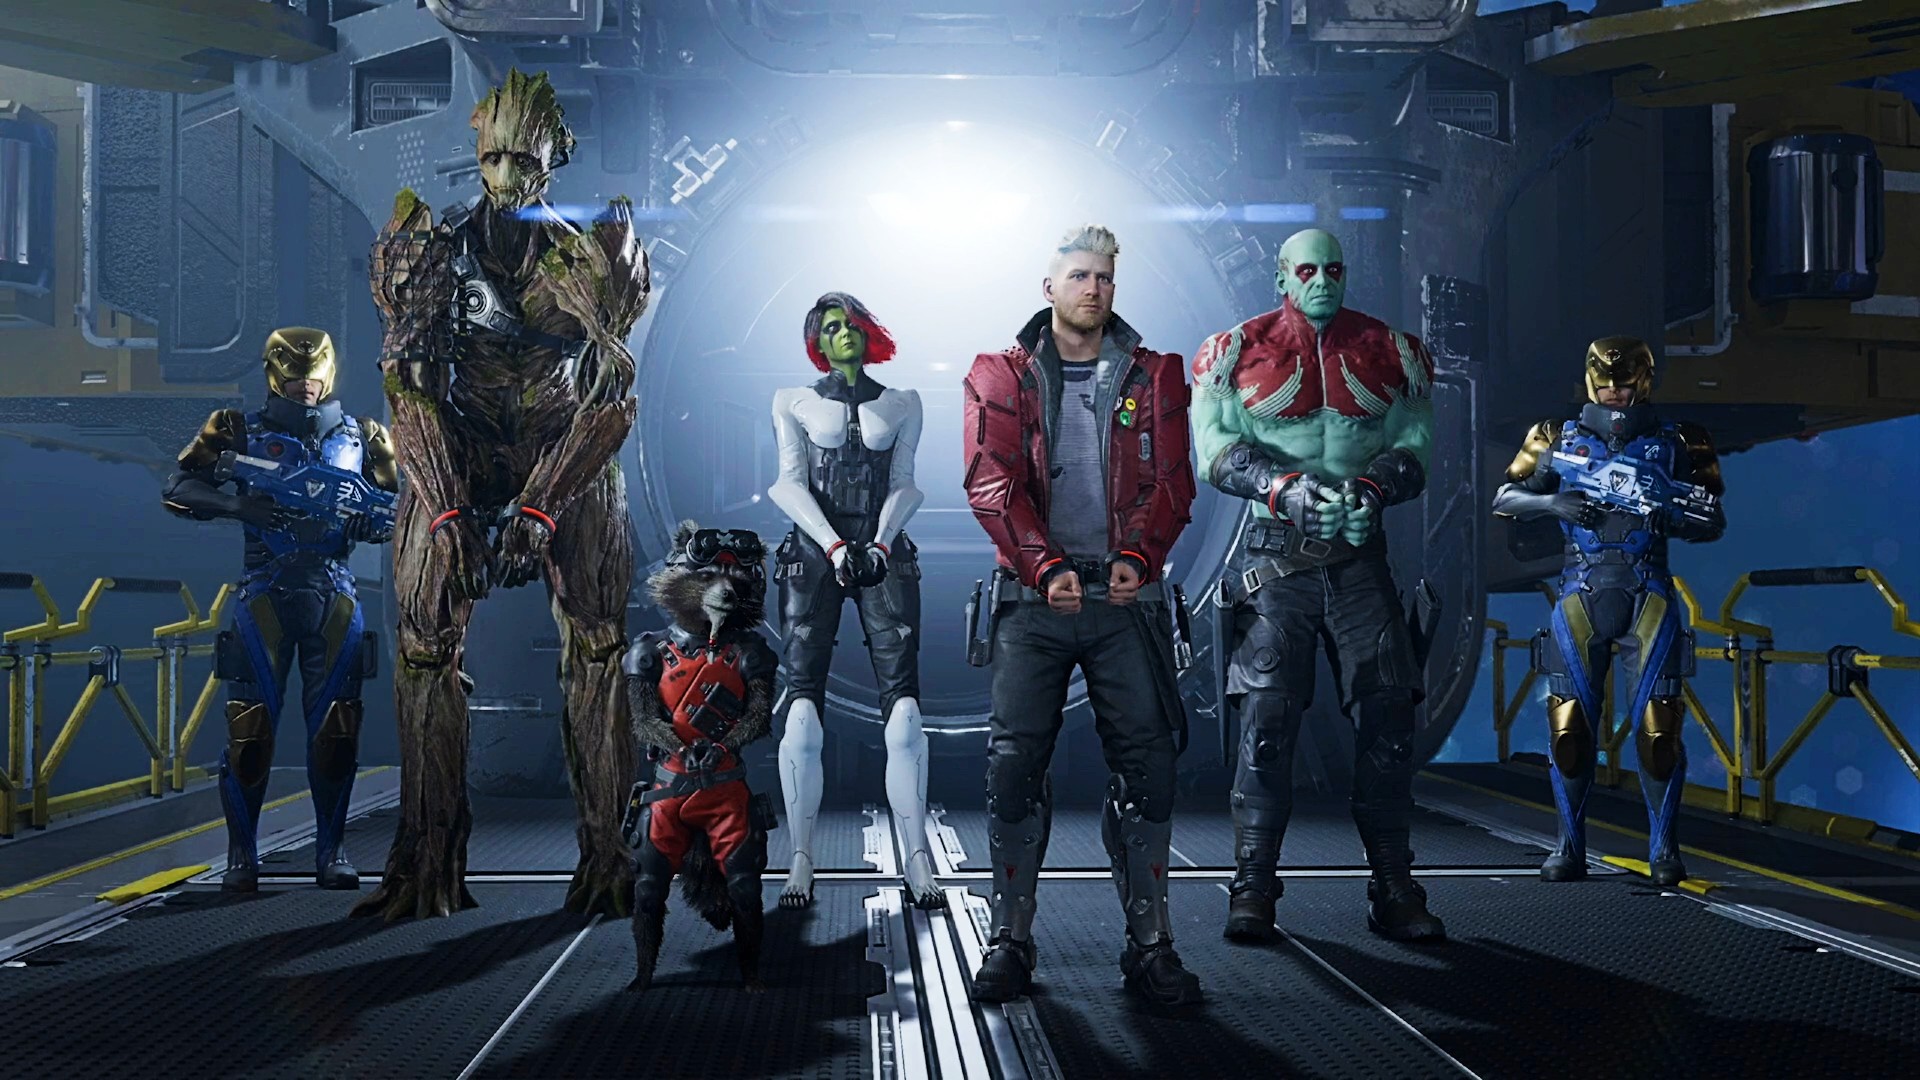 The Guardians of the Galaxy game won’t have DLC or microtransactions